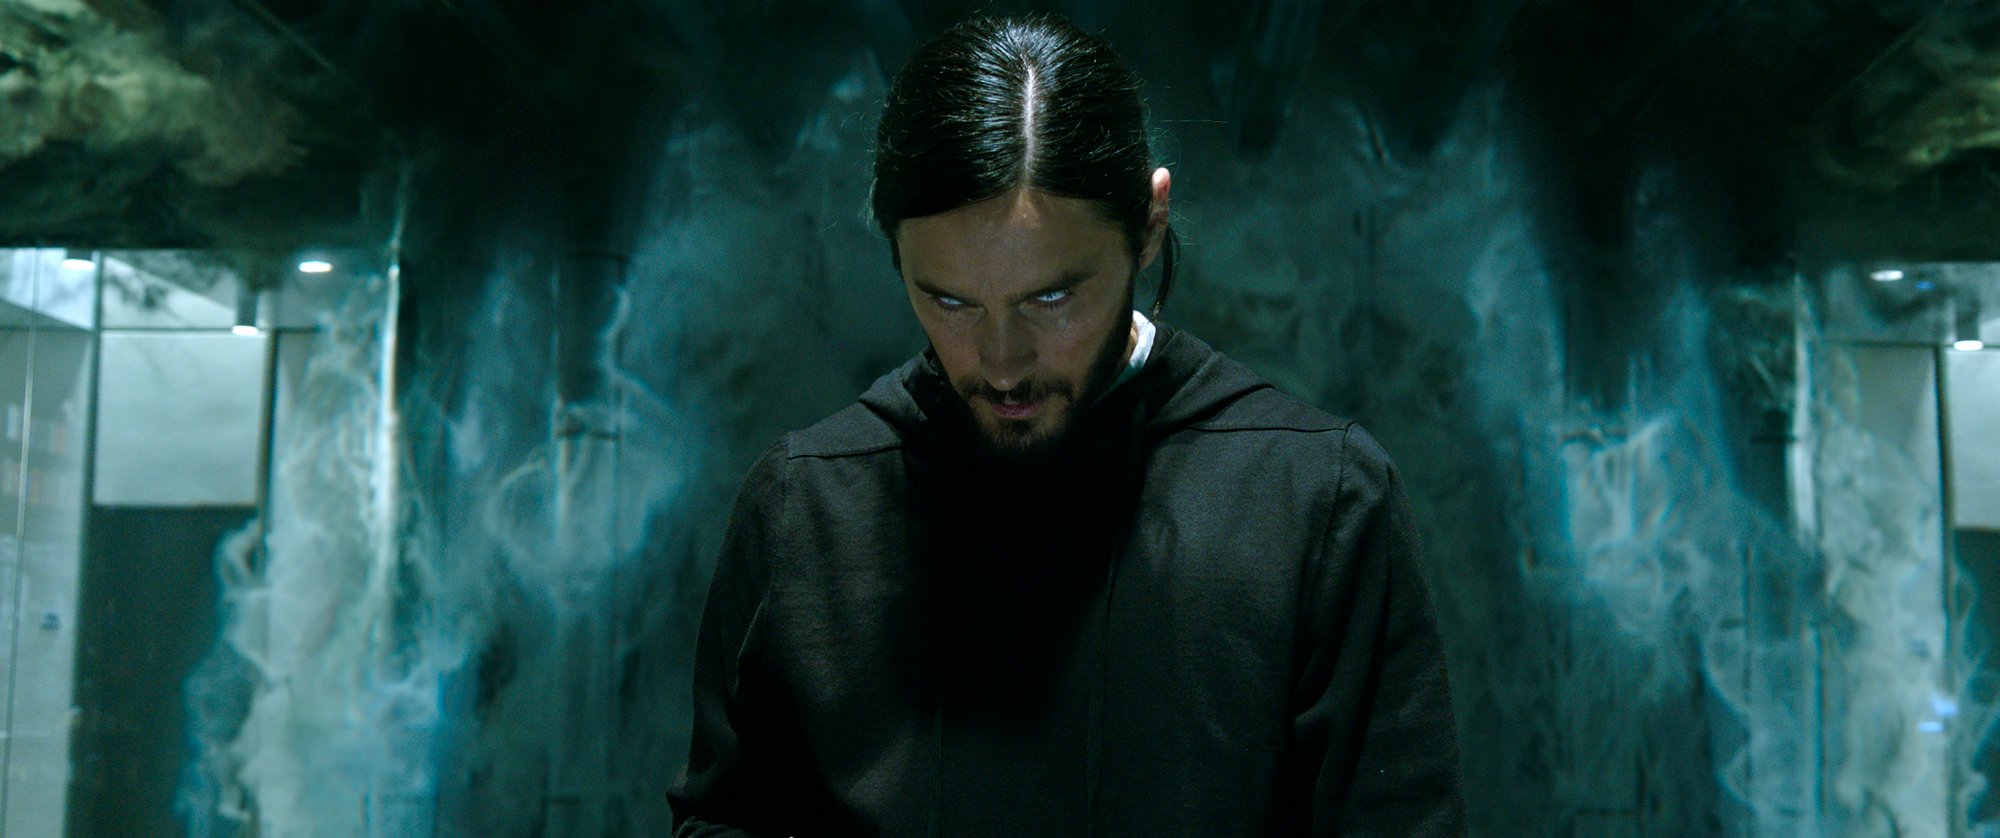 'Morbius' Jared Leto as Dr. Michael Morbius with white eyes looking from under his brow wearing a black hoodie